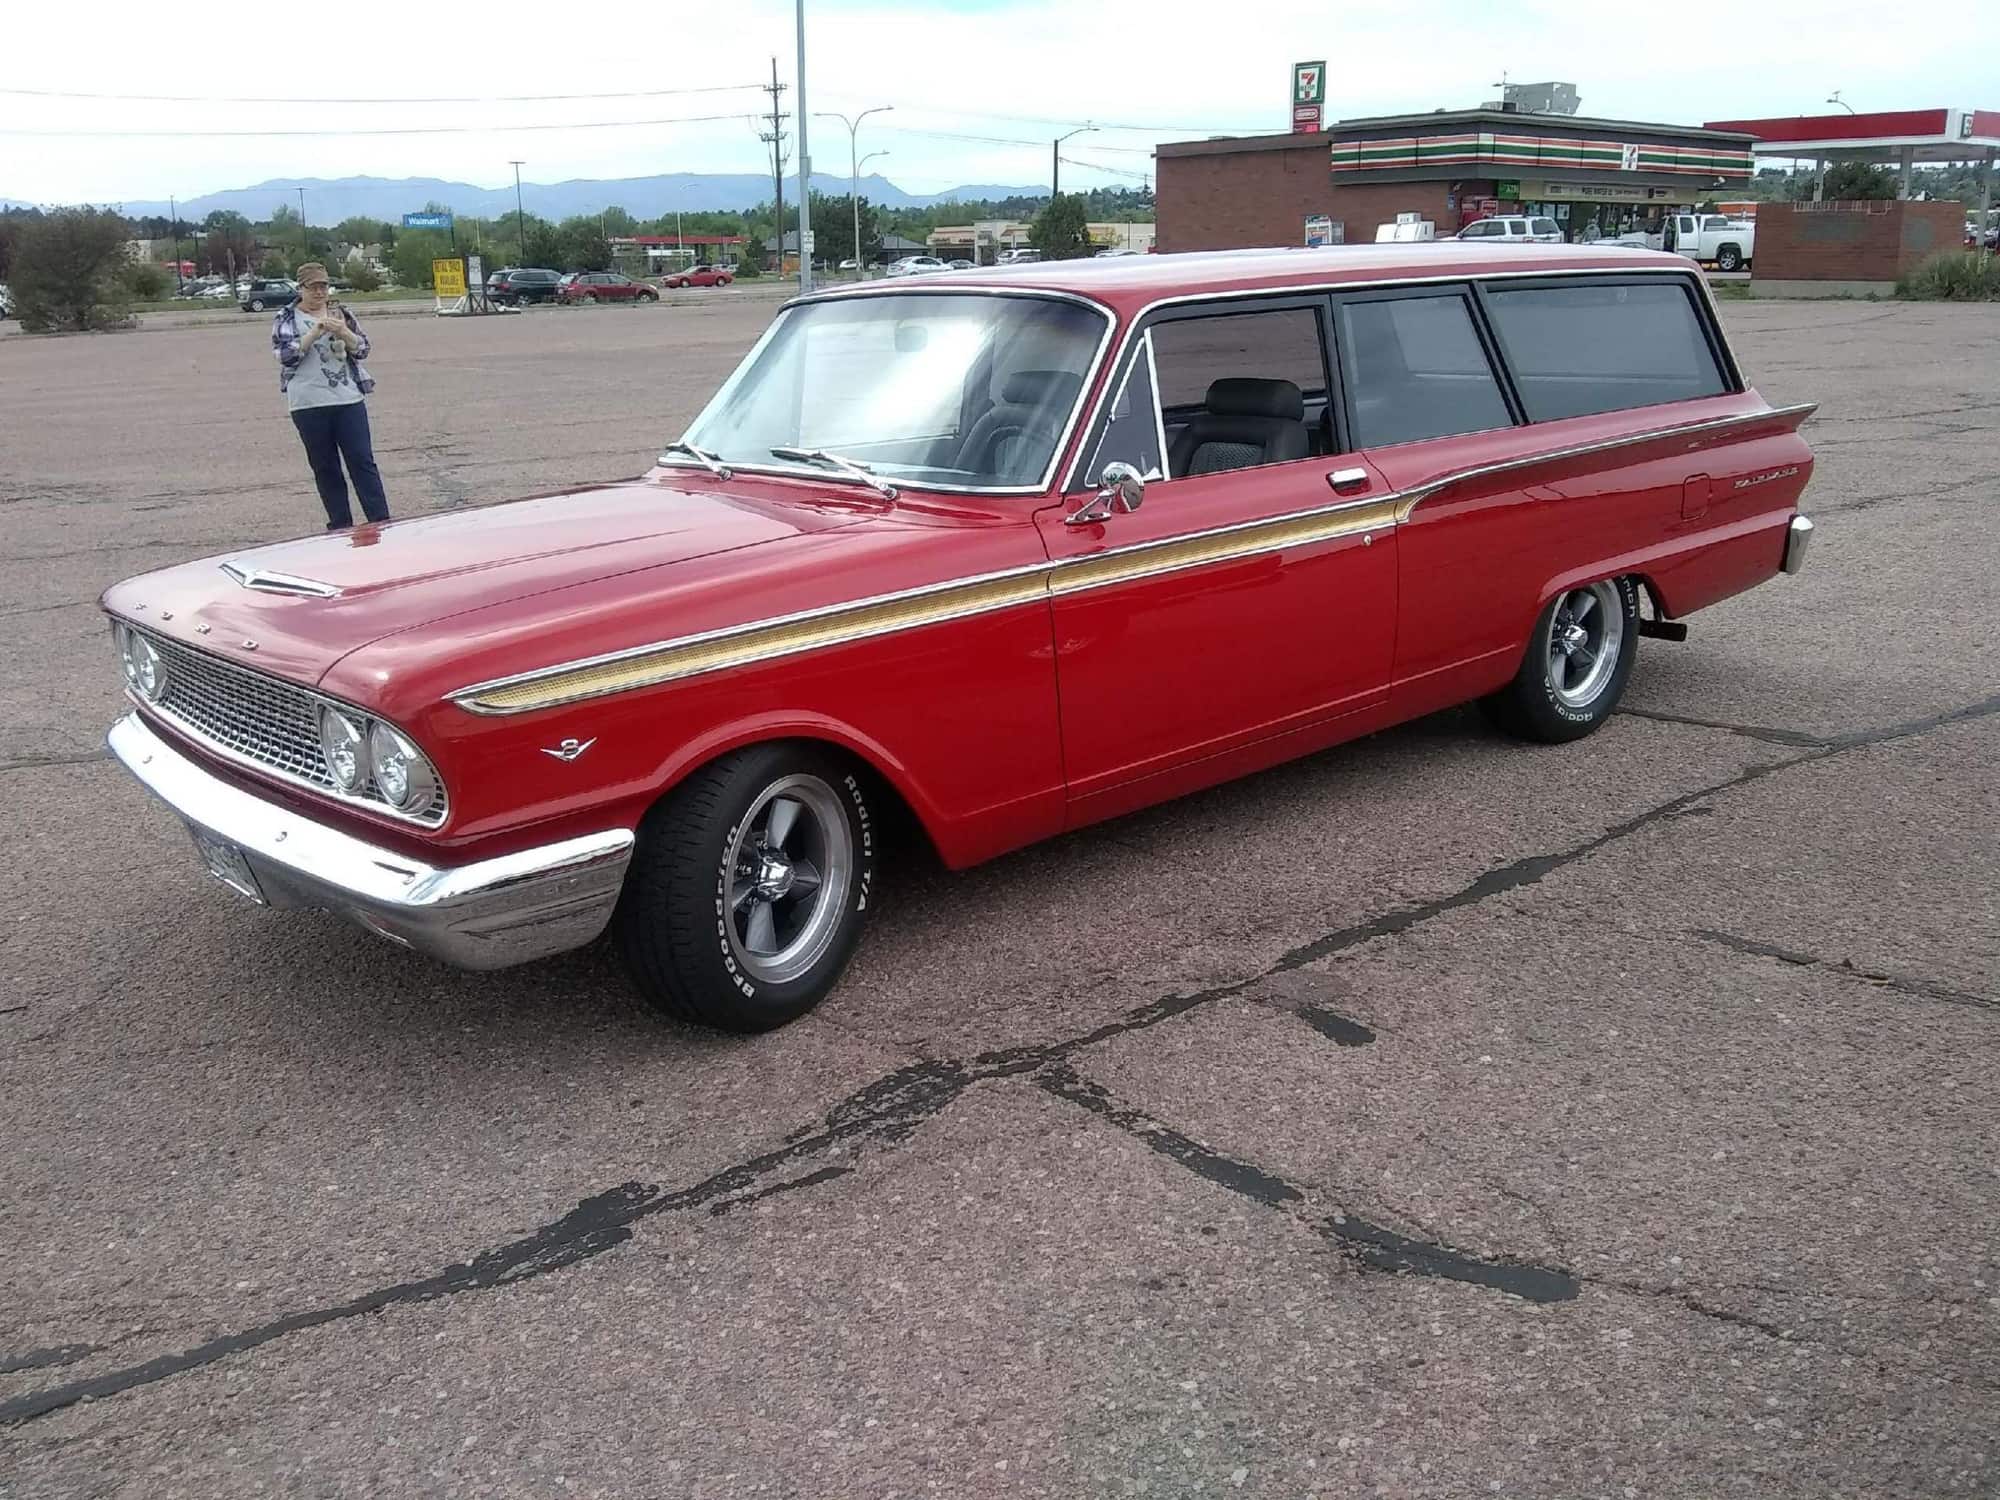 Download OT Ford 1963 Fairlane 2 Door Wagon? - Ford Truck Enthusiasts Forums